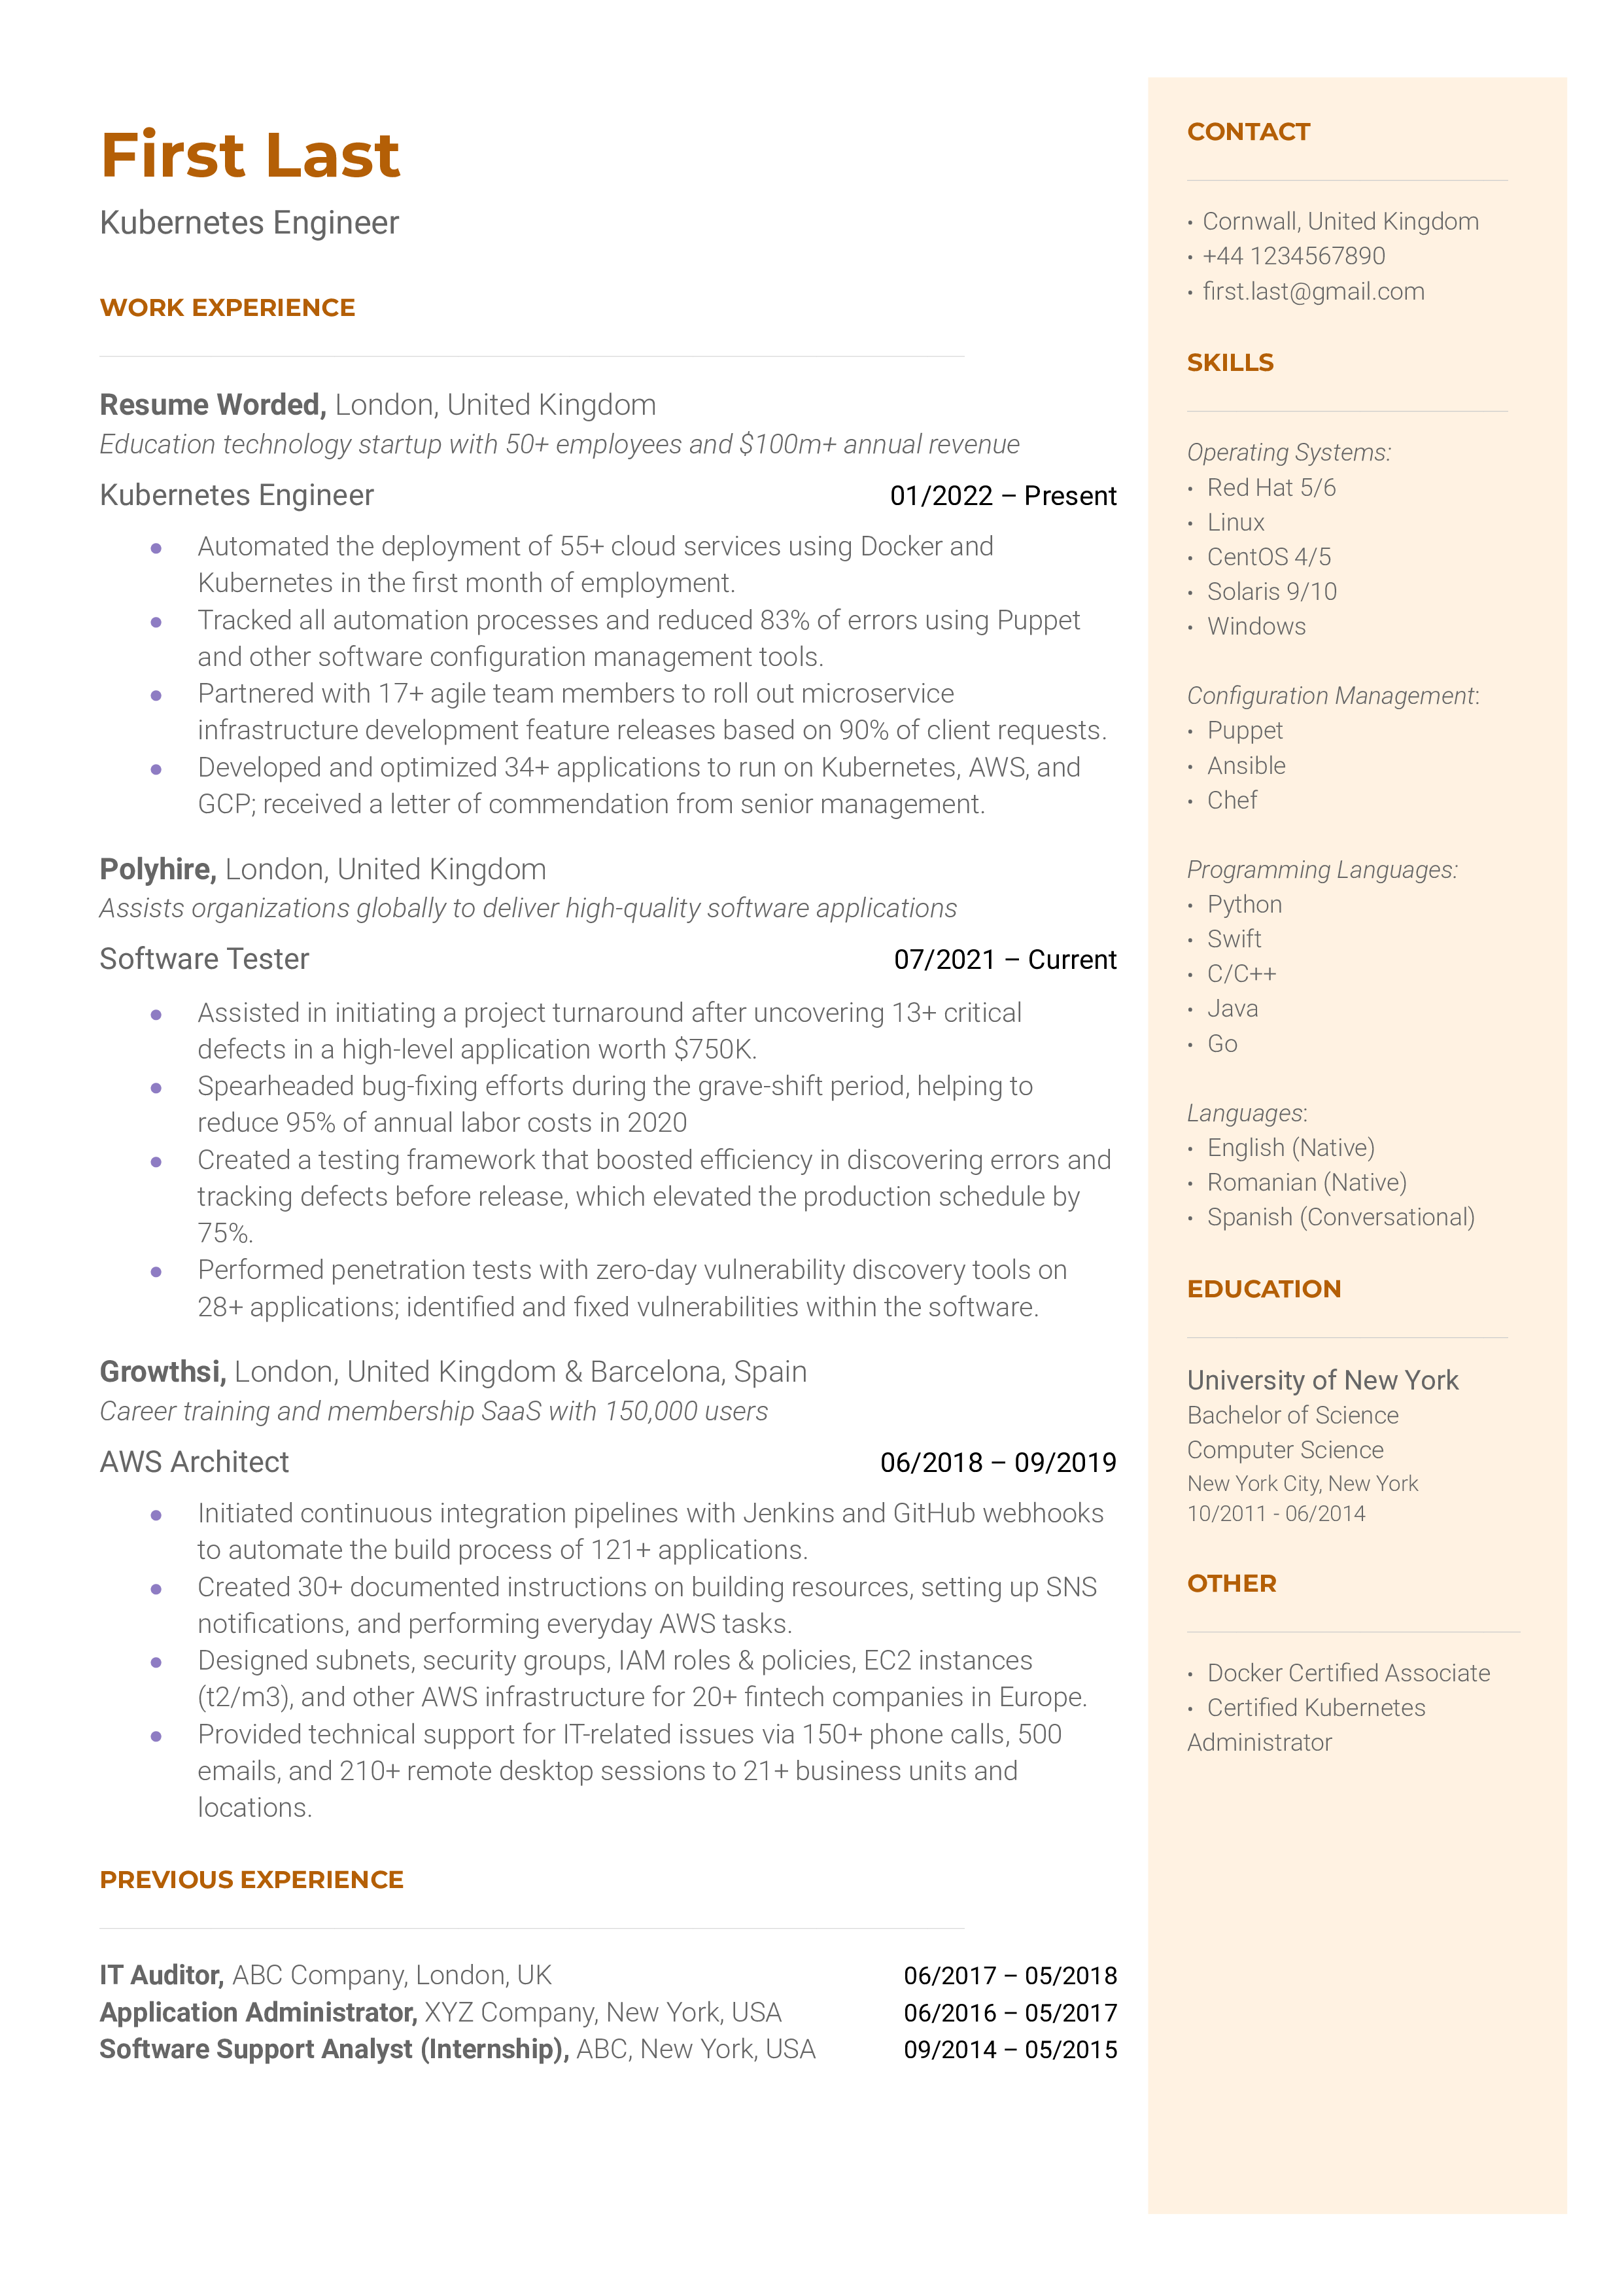 CV of a Kubernetes Engineer emphasizing on skills and project experience.